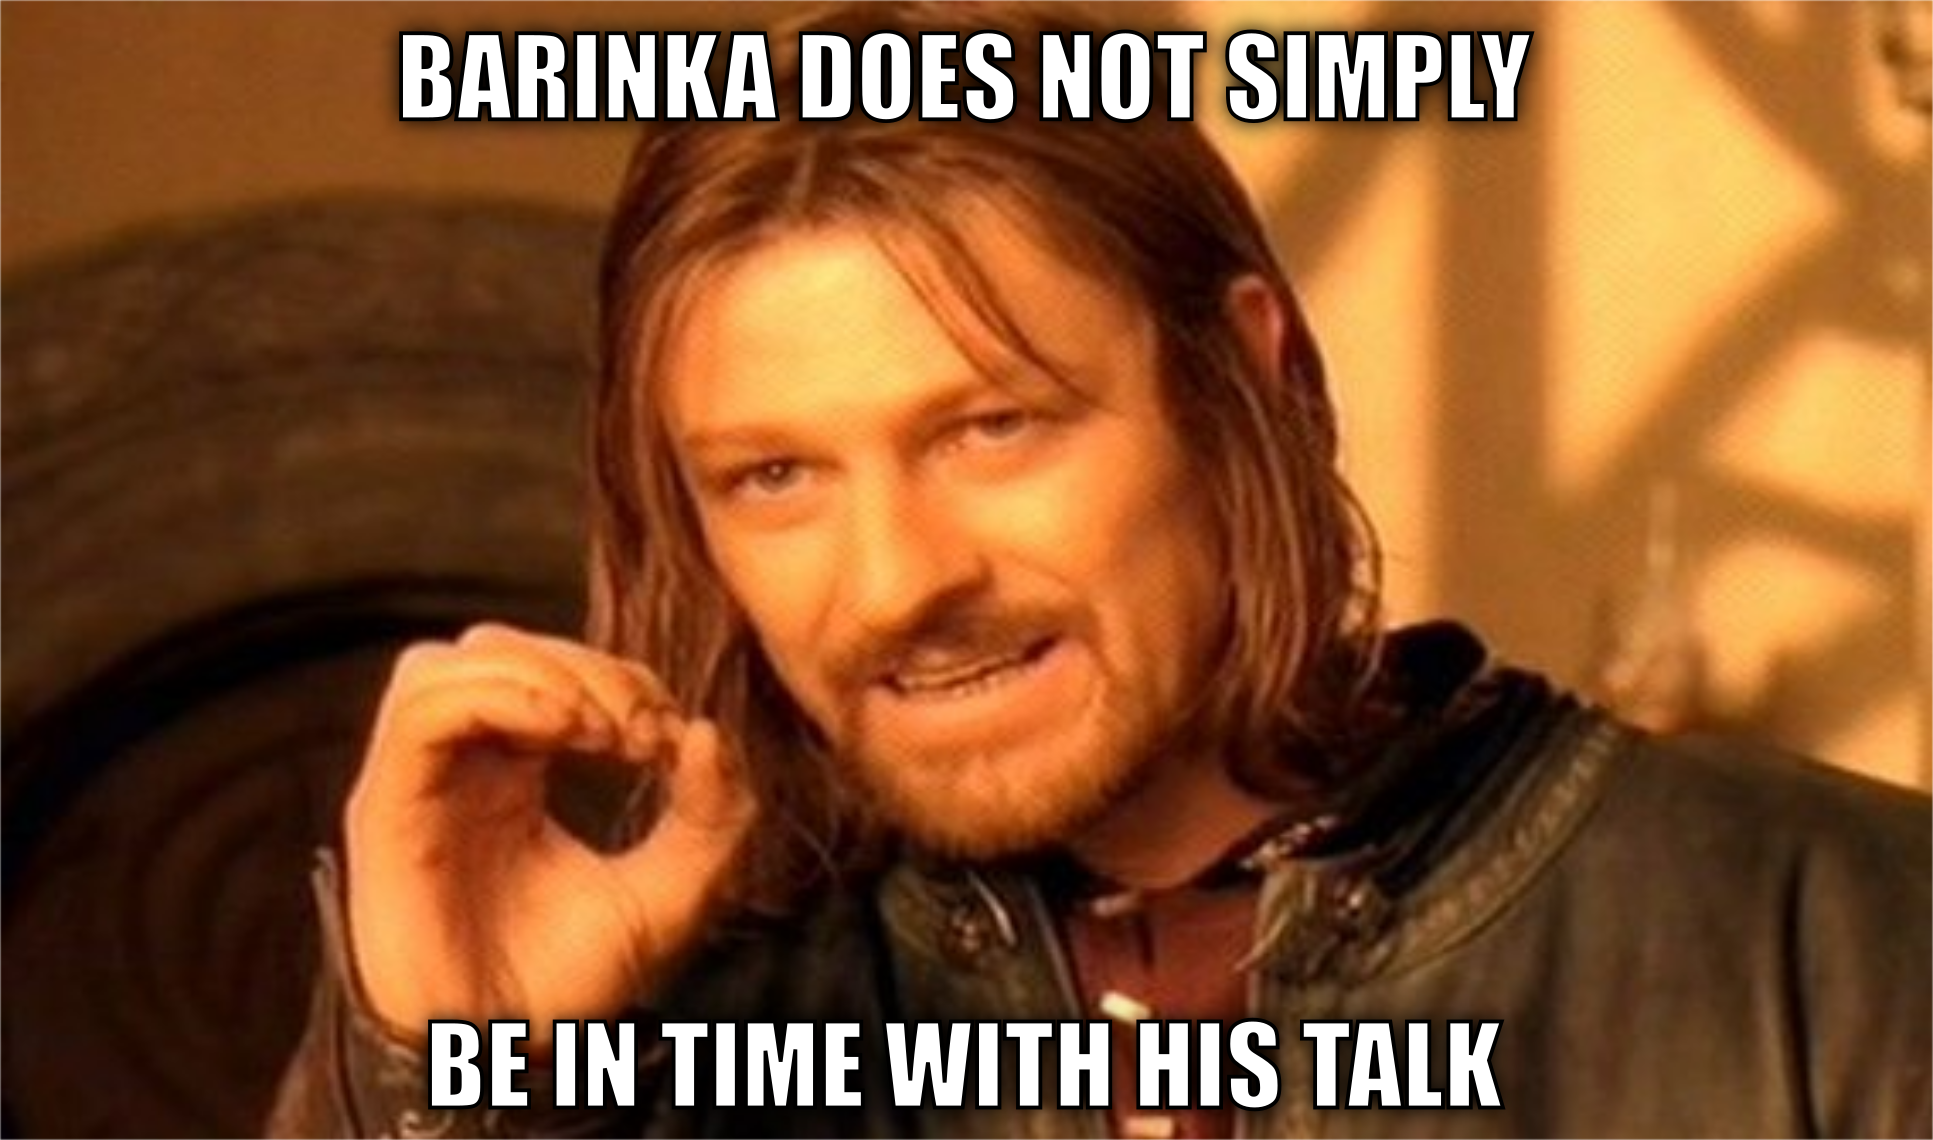 Barinka does not simply be in time with his talk.